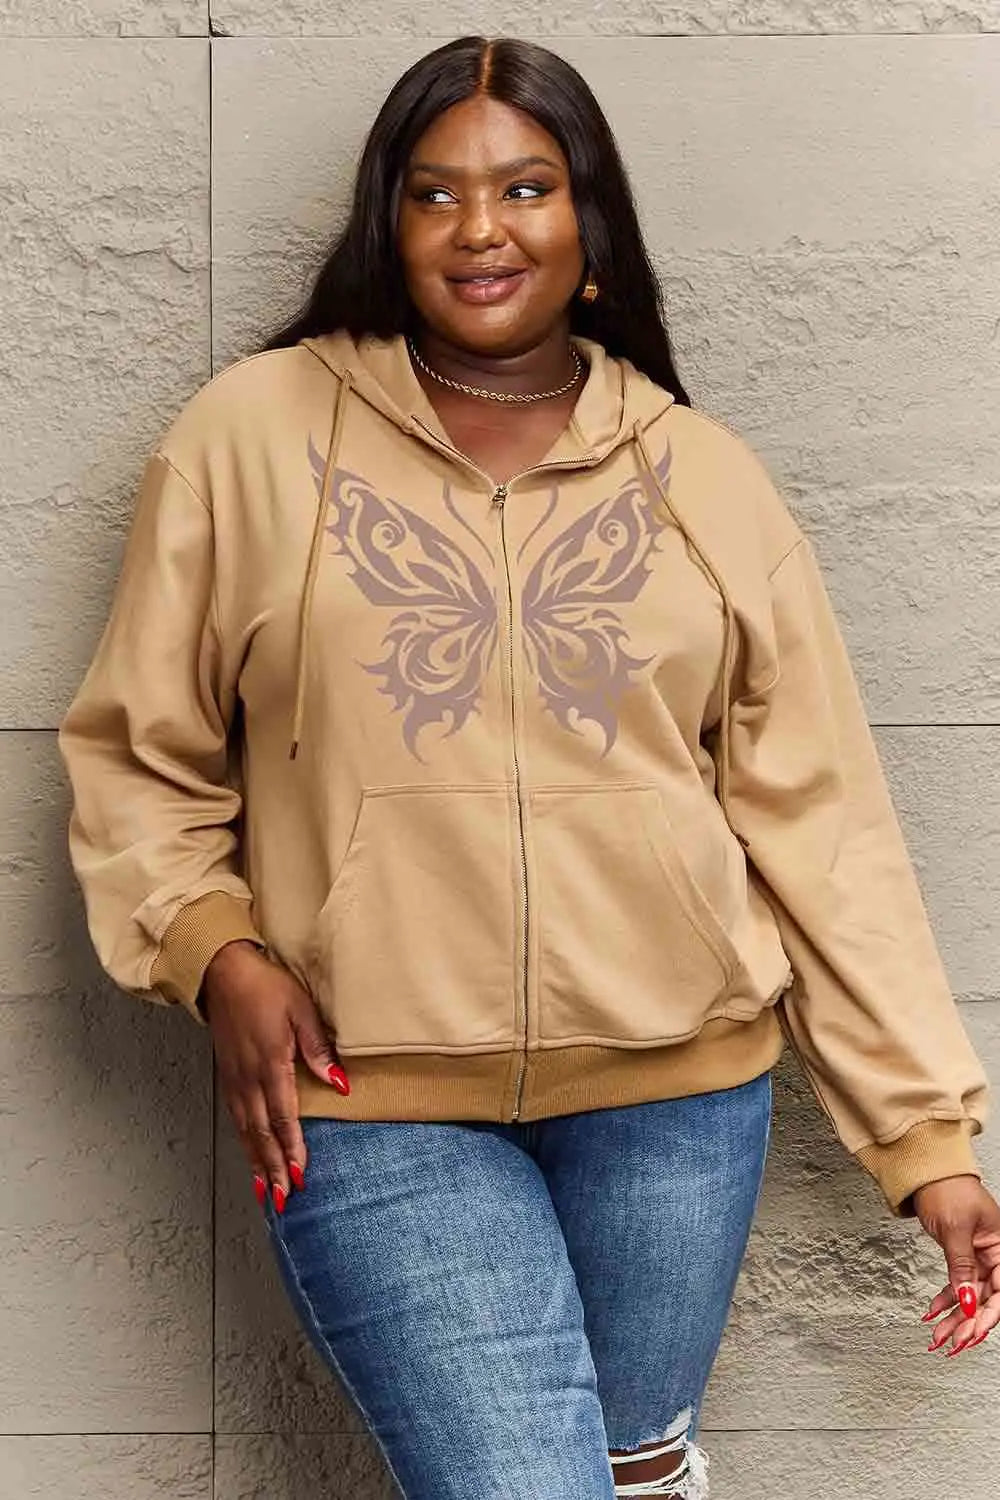 Simply Love Full Size Butterfly Graphic Hoodie - Image #5